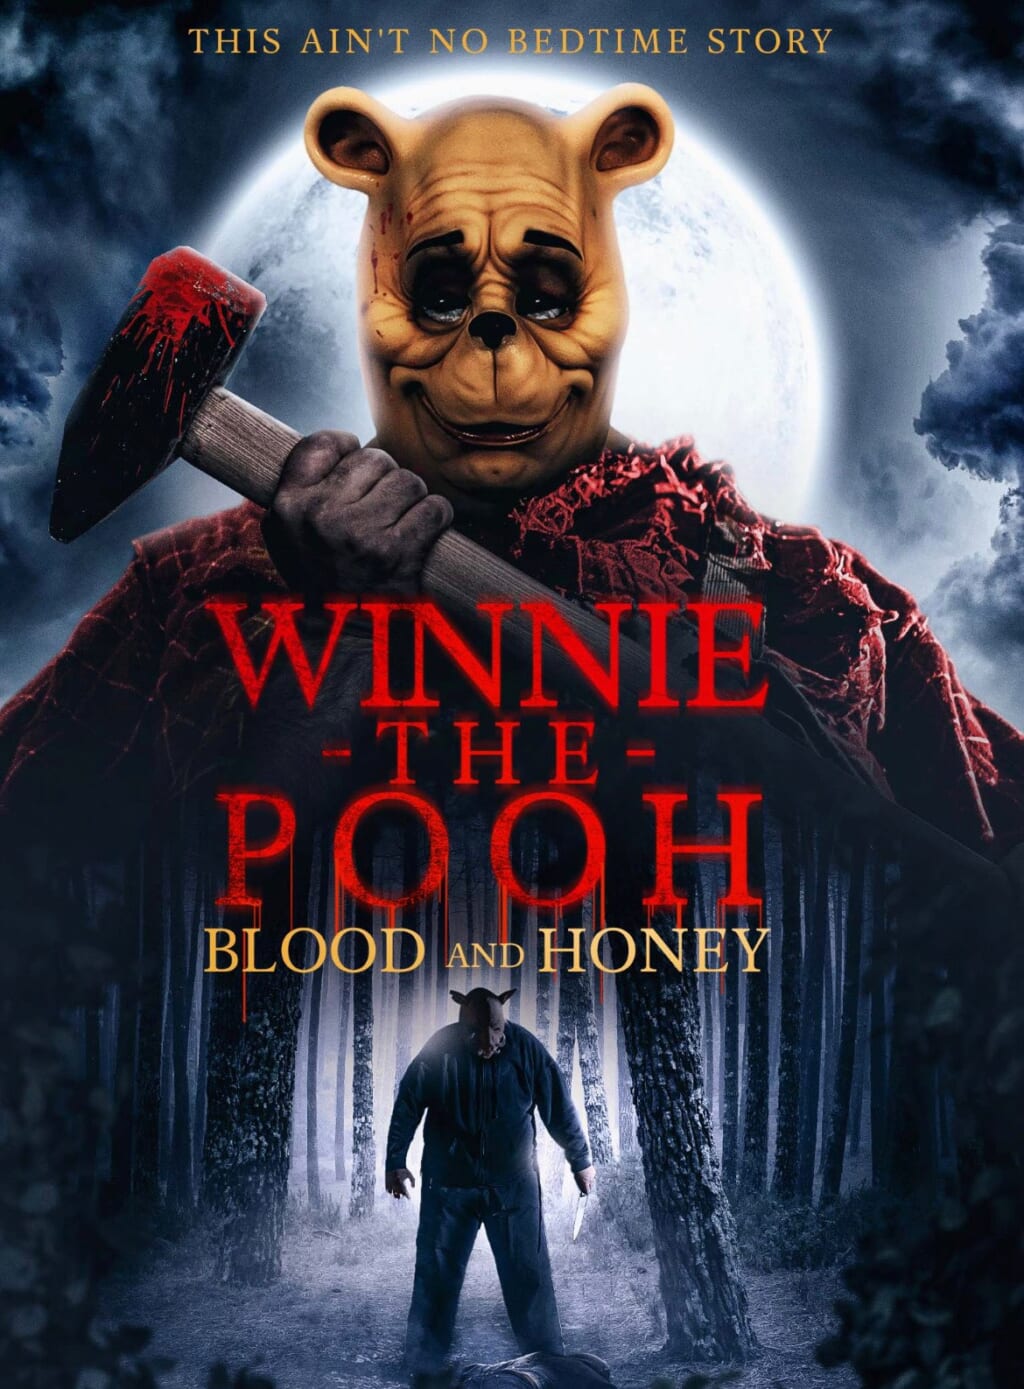 Winne the Pooh Blood and Honey poster 1024x1389 - The 'Winnie the Pooh: Blood and Honey' Poster Art Will Ruin Your Childhood [Exclusive]